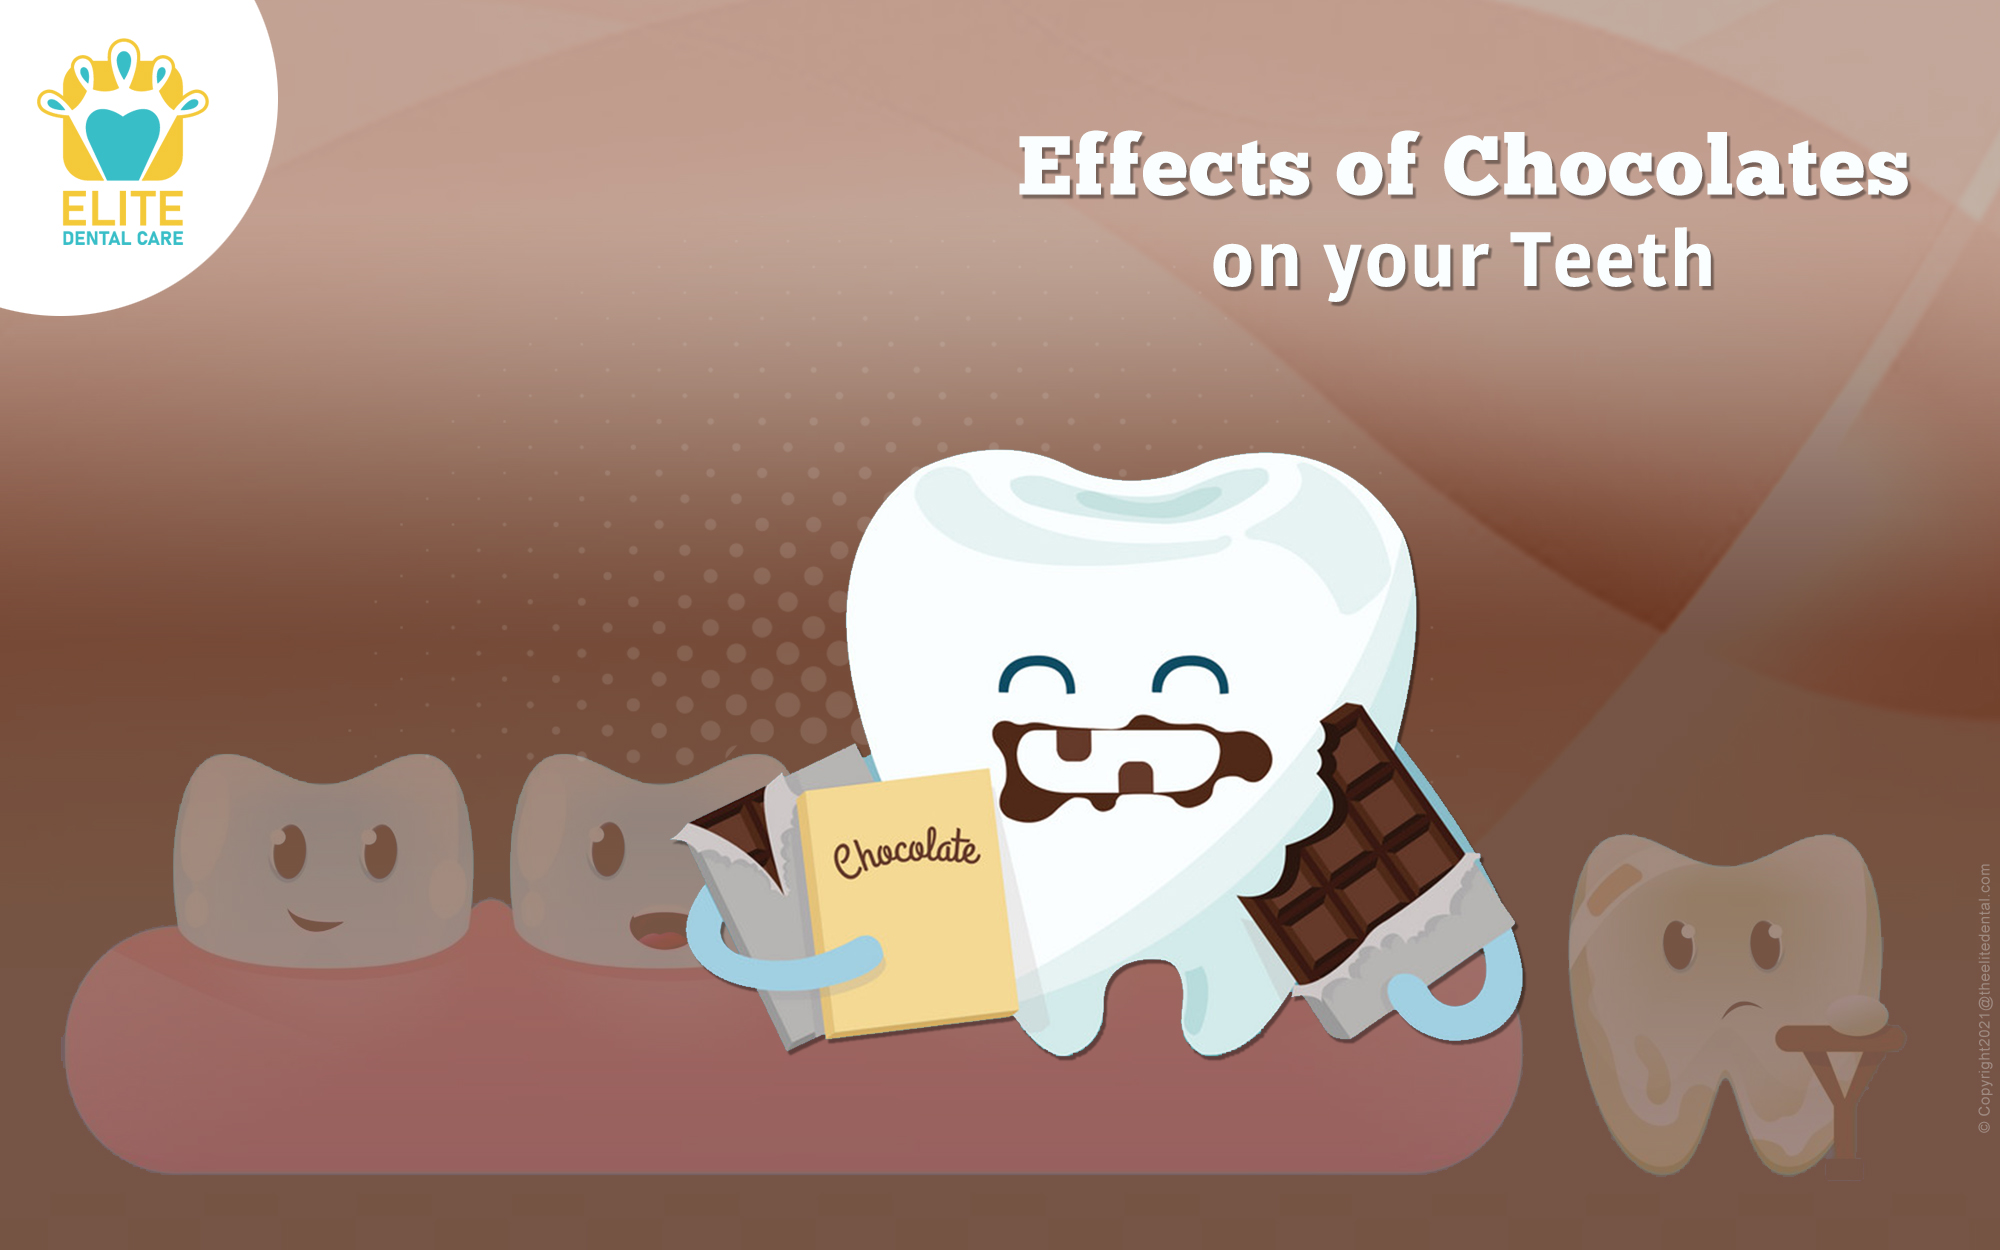 EFFECTS OF CHOCOLATES ON YOUR TEETH